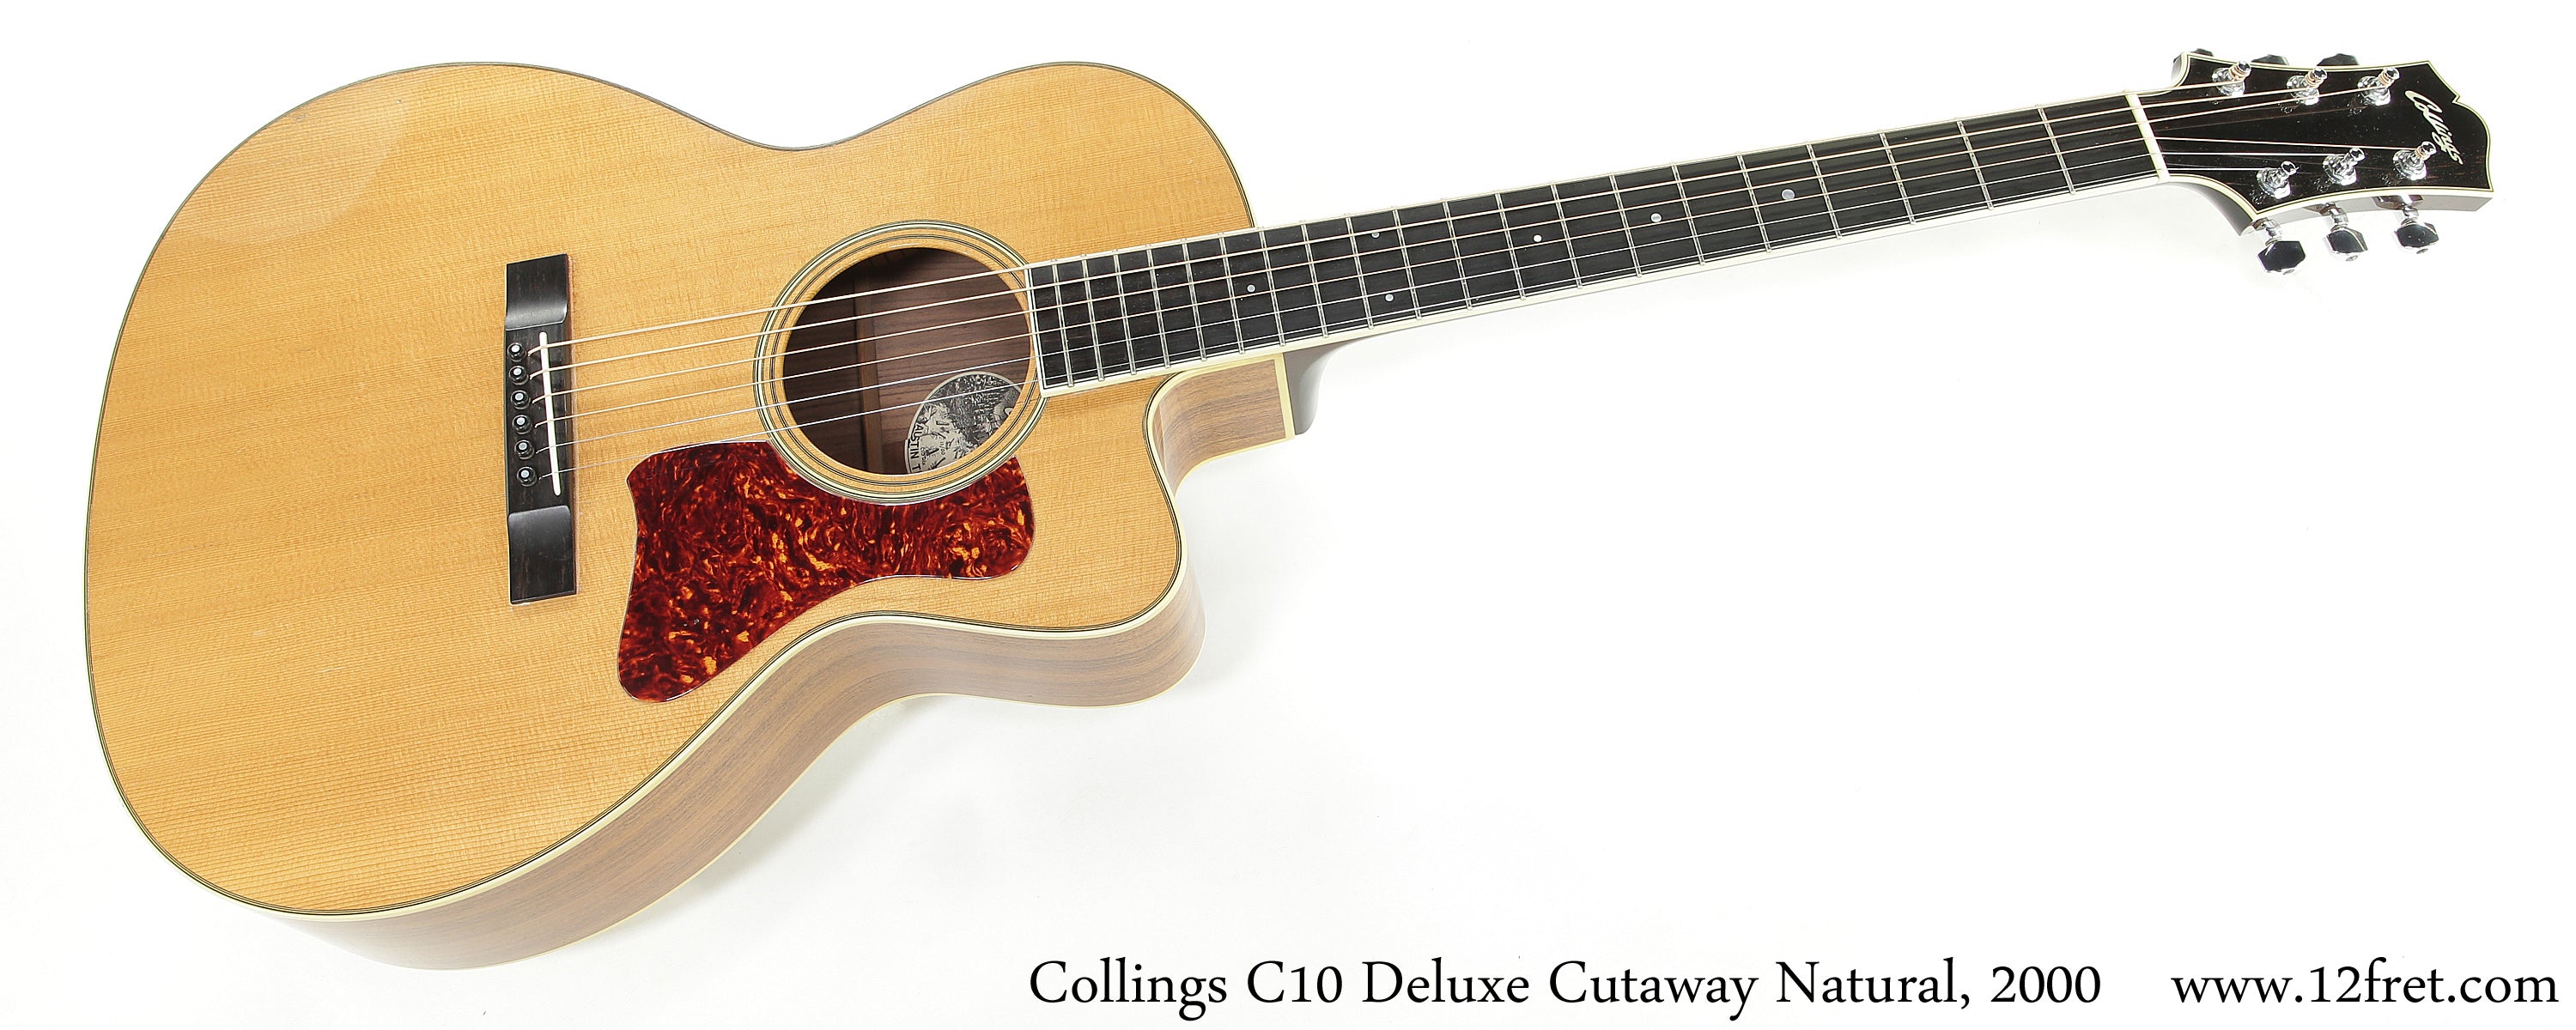 Collings C10 Deluxe Cutaway Natural, 2000 - The Twelfth Fret